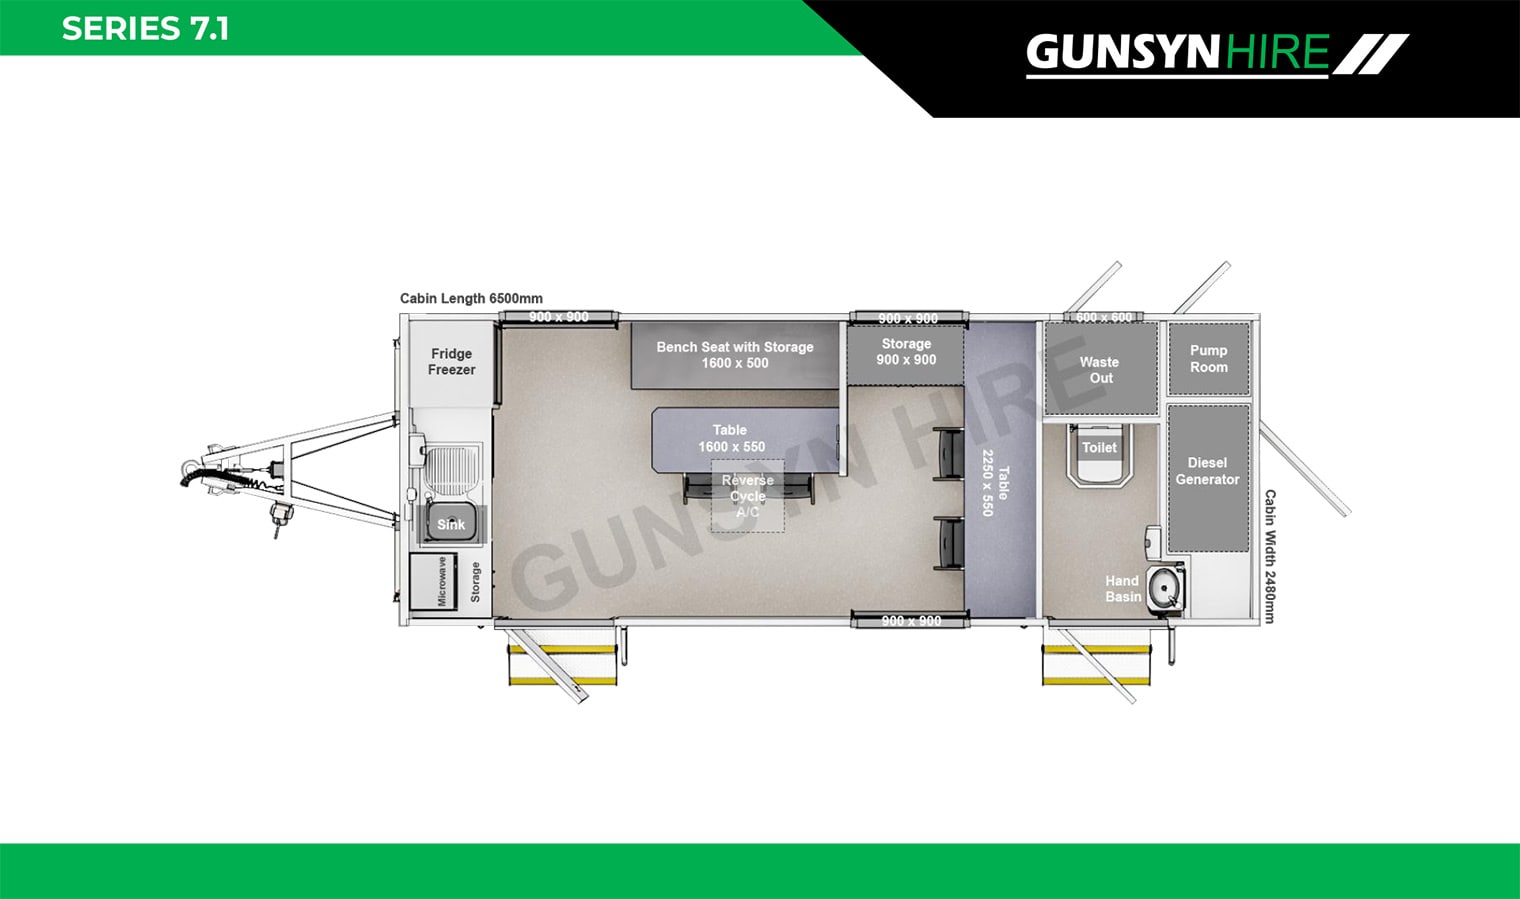 Detailed Schematics for the 7.1 Series Mobile Site Caravan